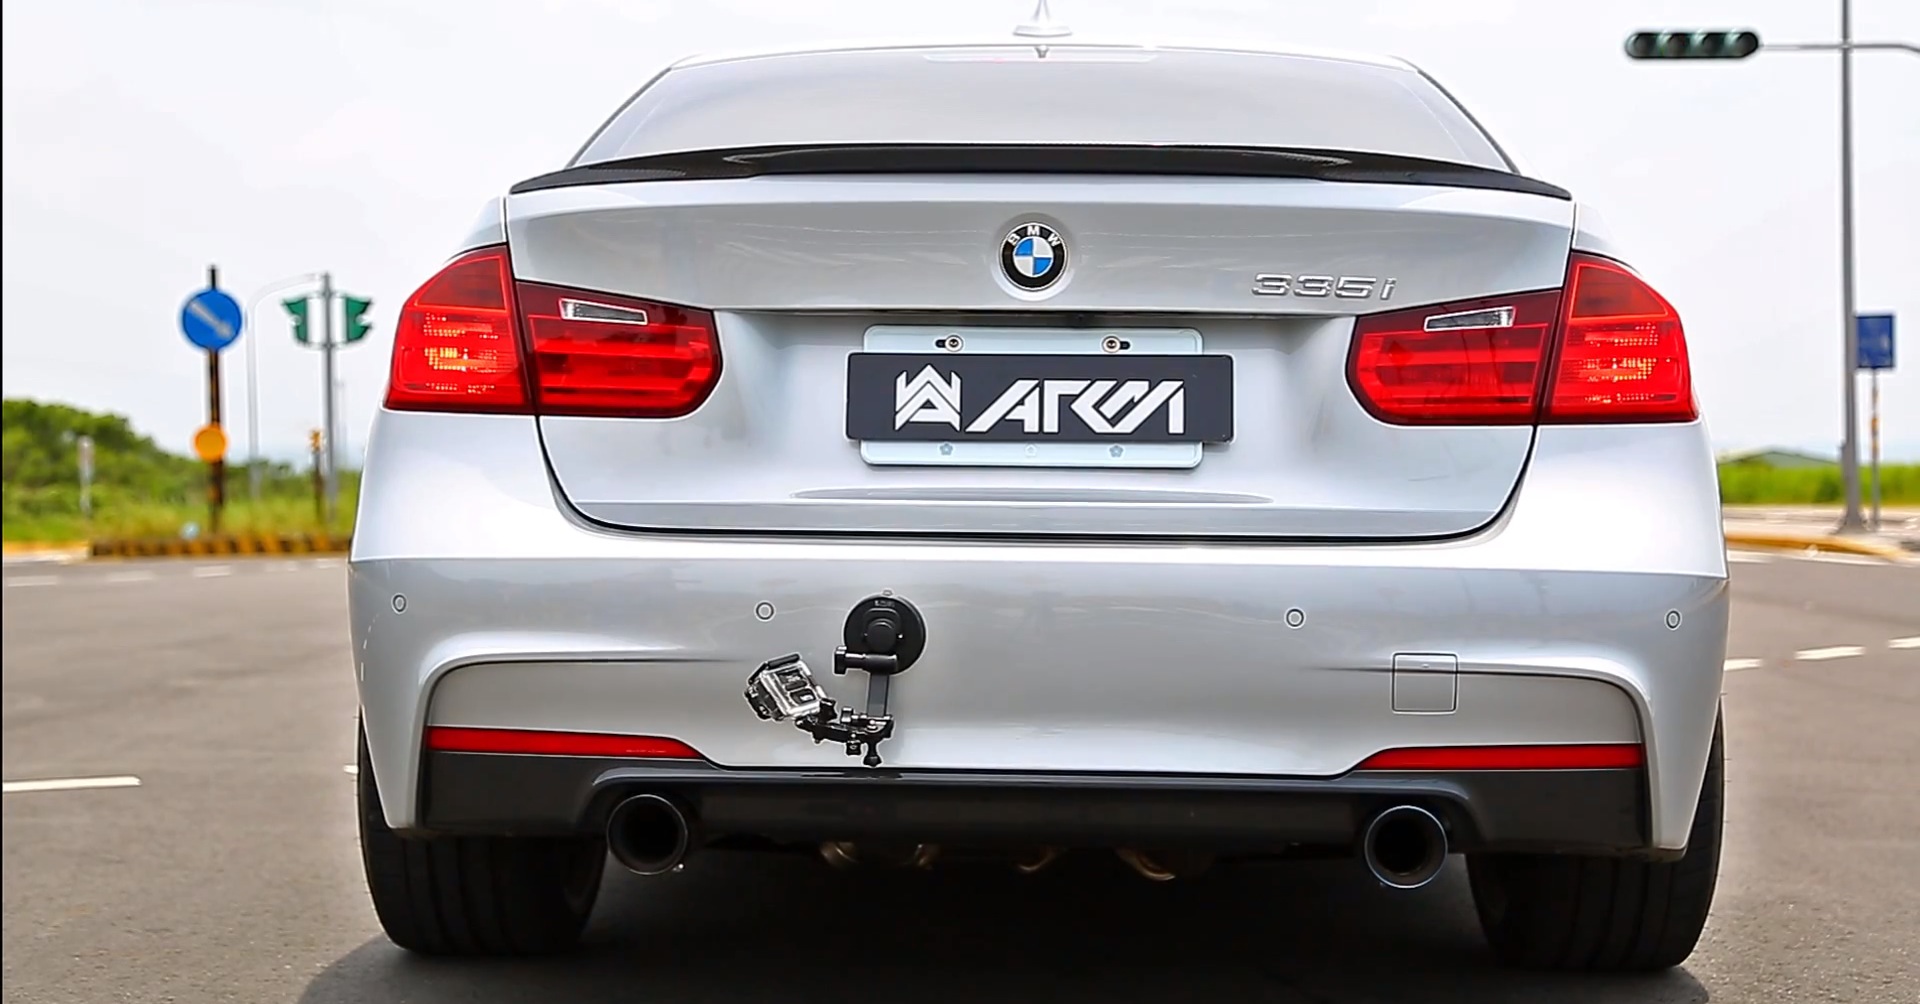 https://s1.cdn.autoevolution.com/images/news/armytrix-valvetronic-exhaust-system-for-bmws-f30-335i-sounds-vicious-video-83140_1.jpg